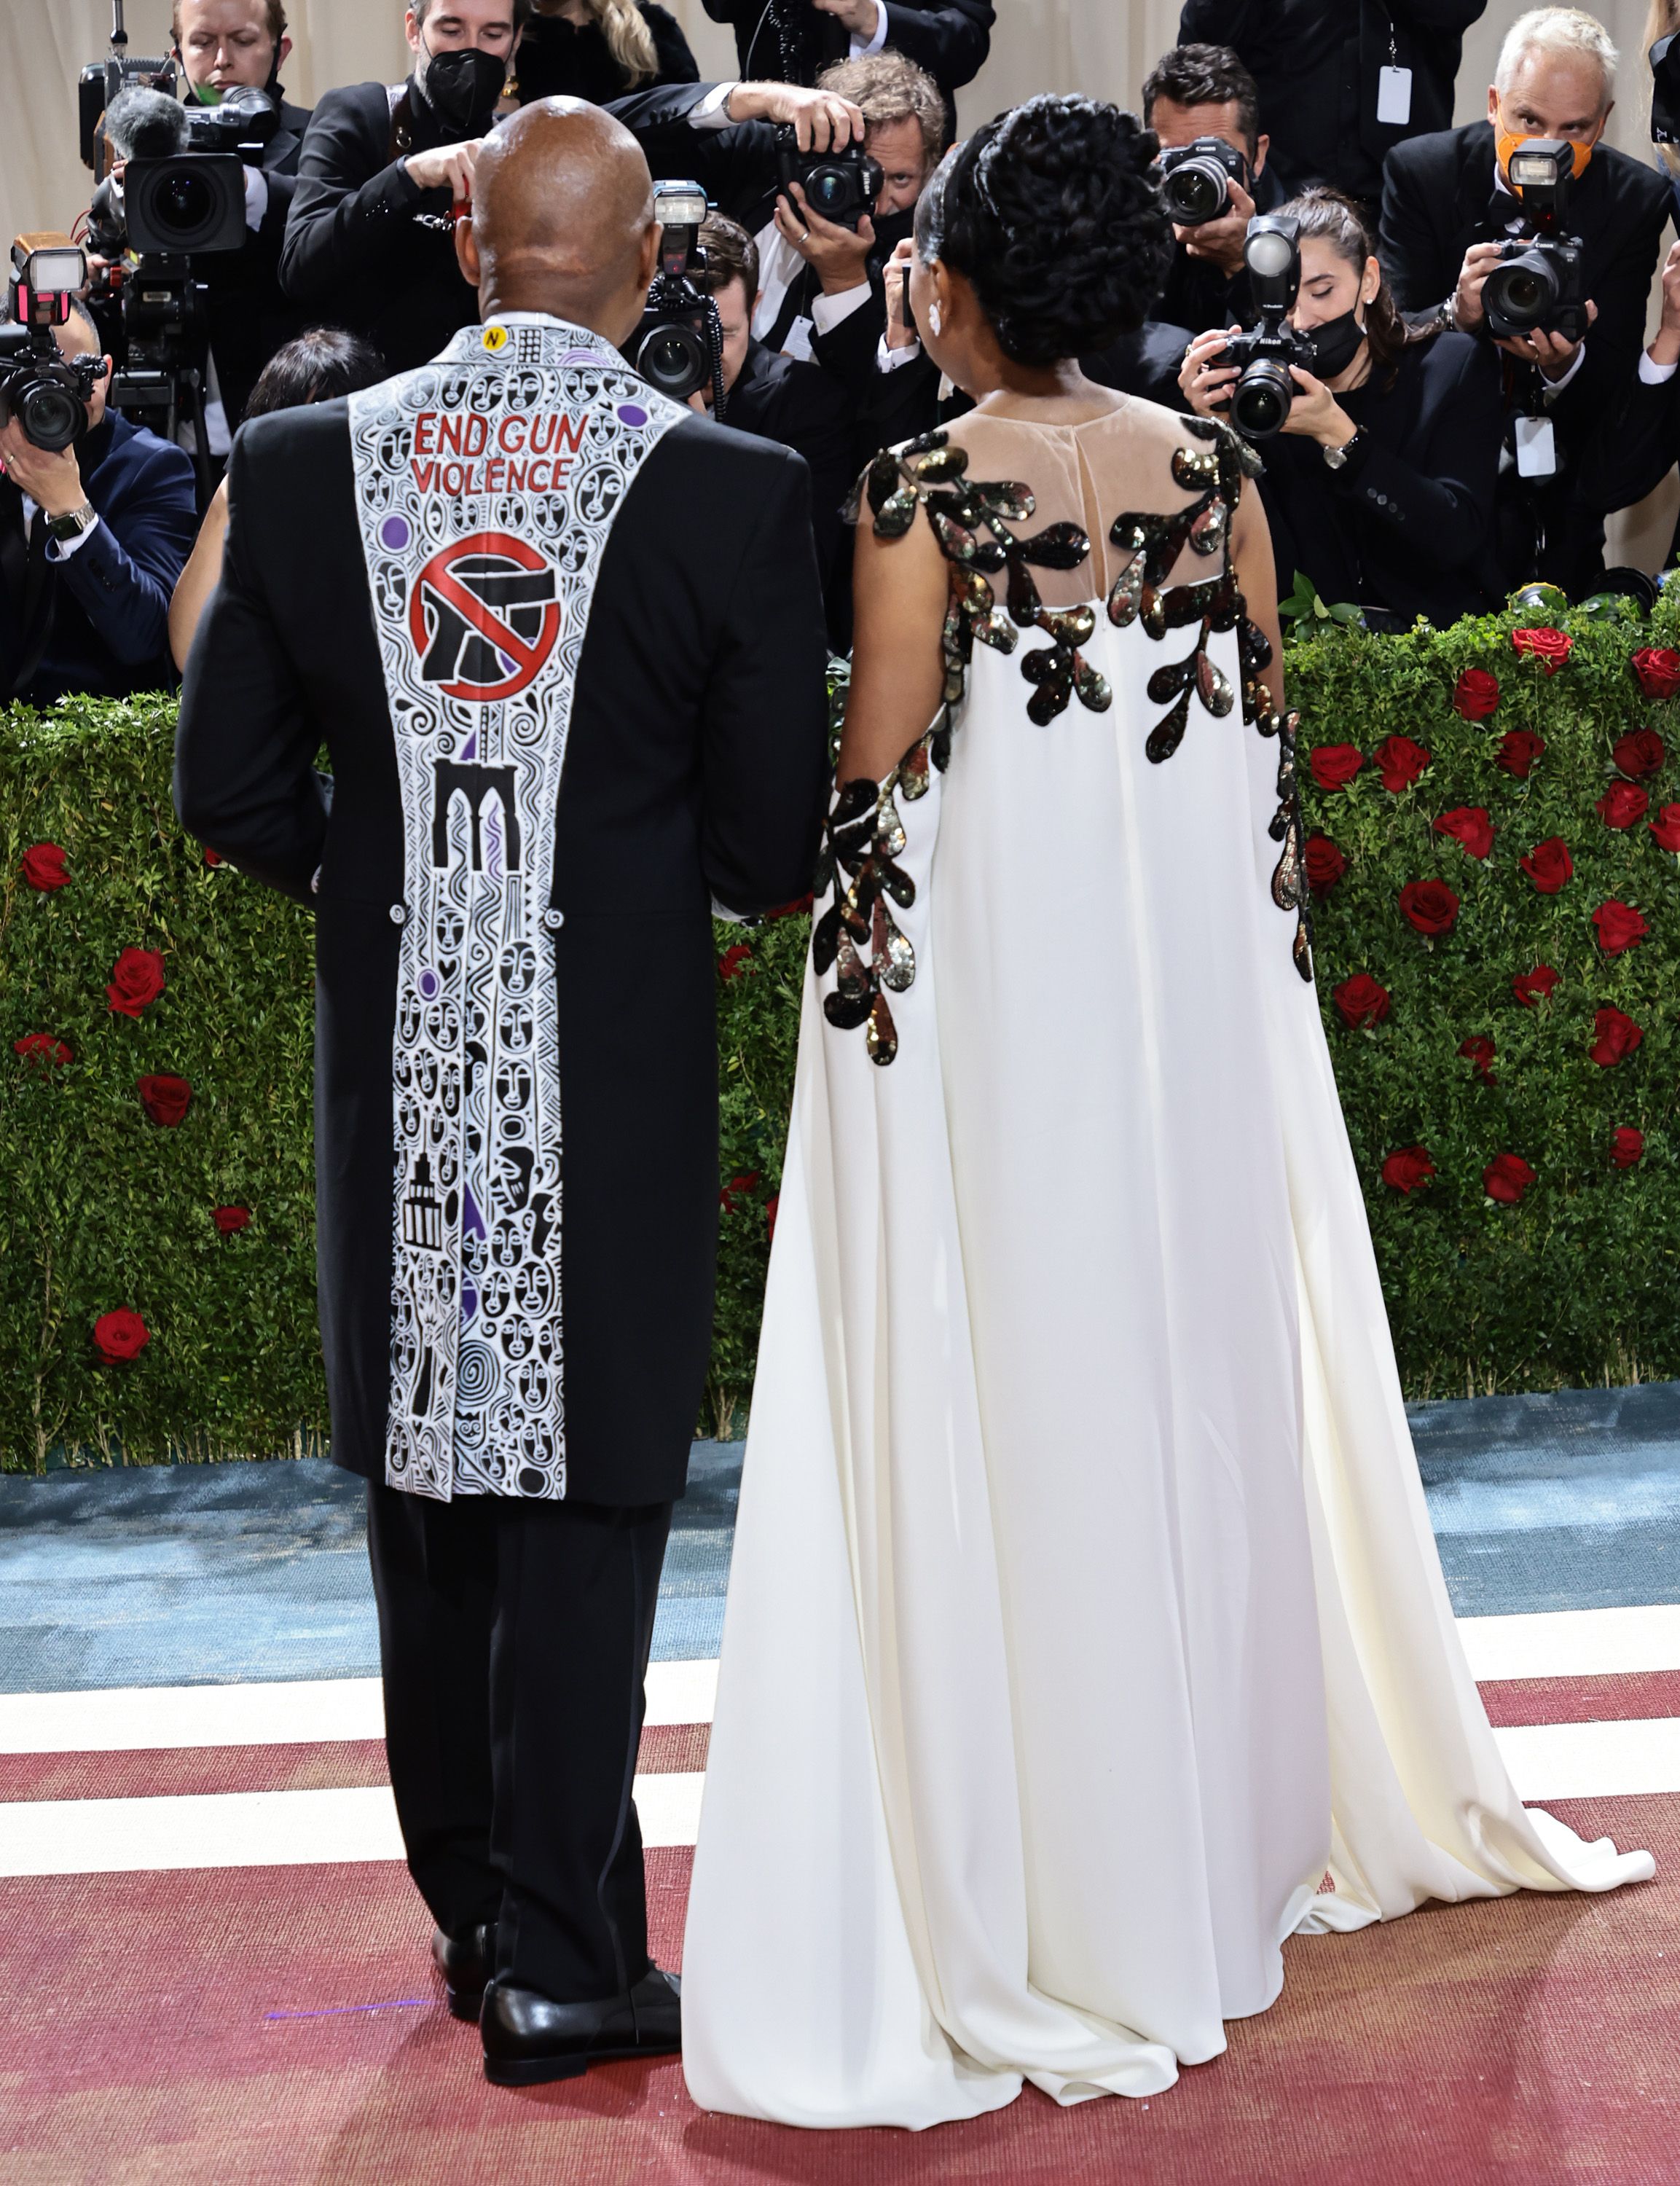 Met Gala: Political Fashion Statements Celebrities Have Made